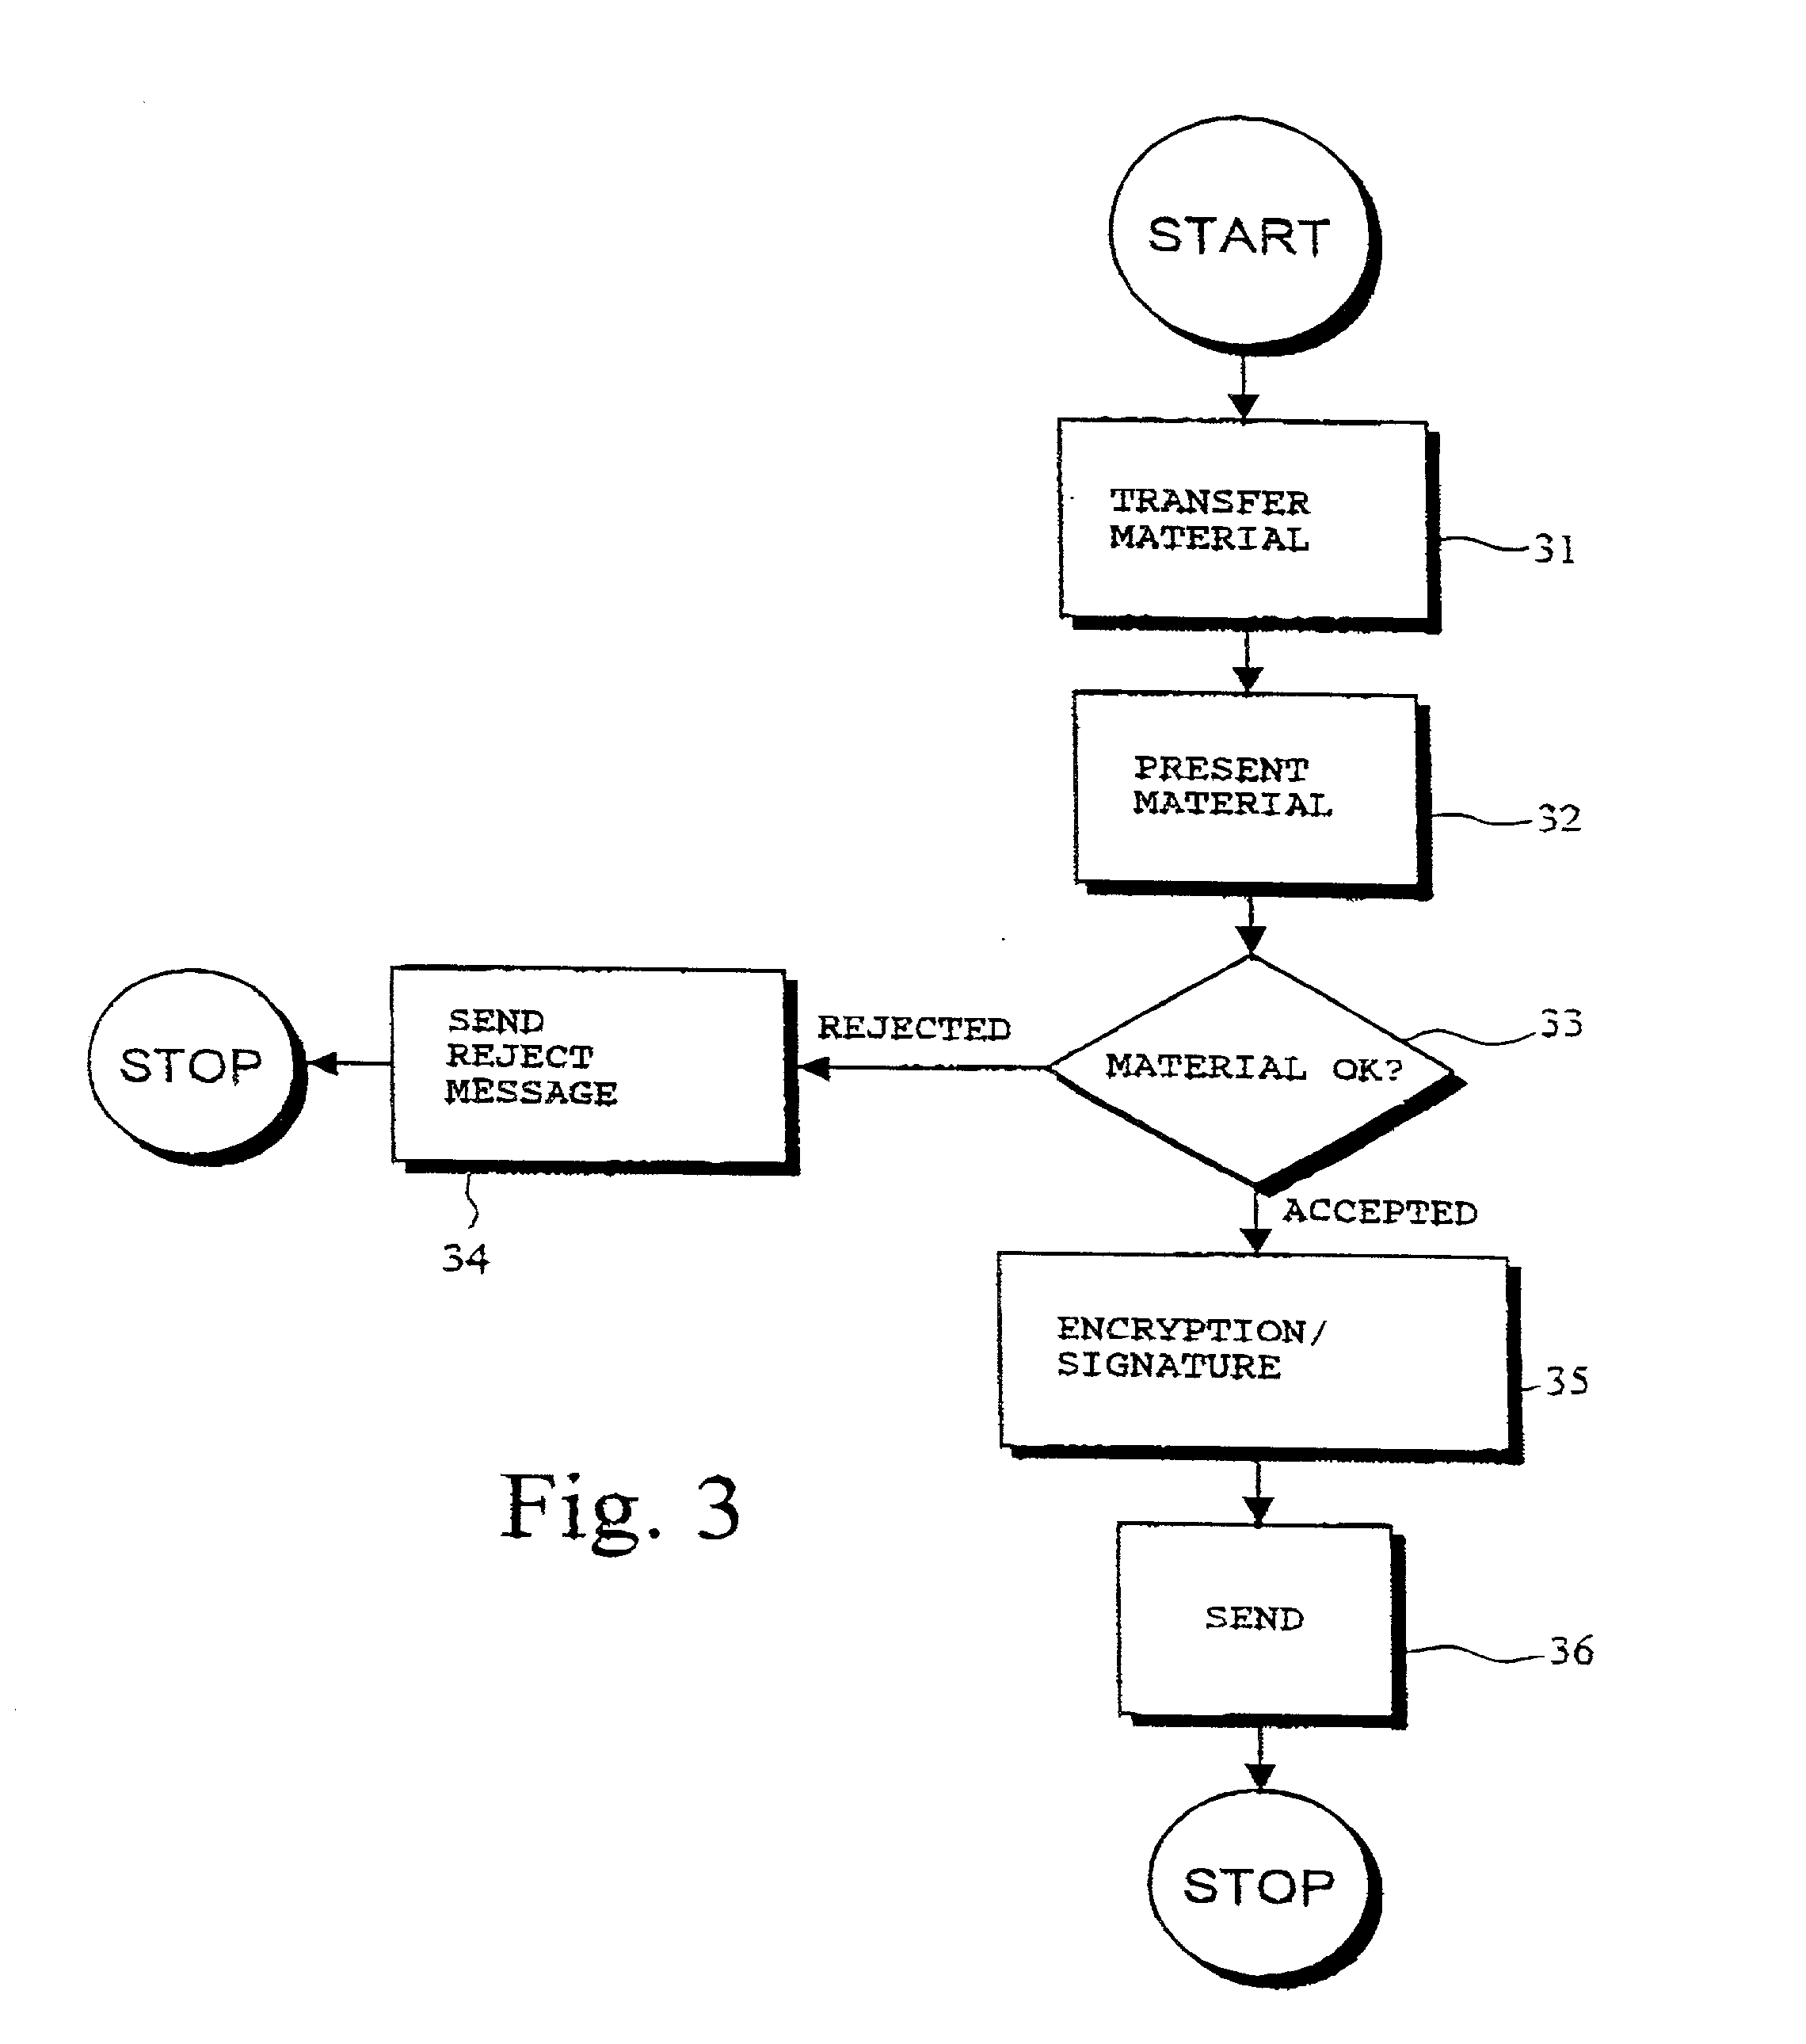 System and method for implementing secure mobile-based transactions in a telecommunication system